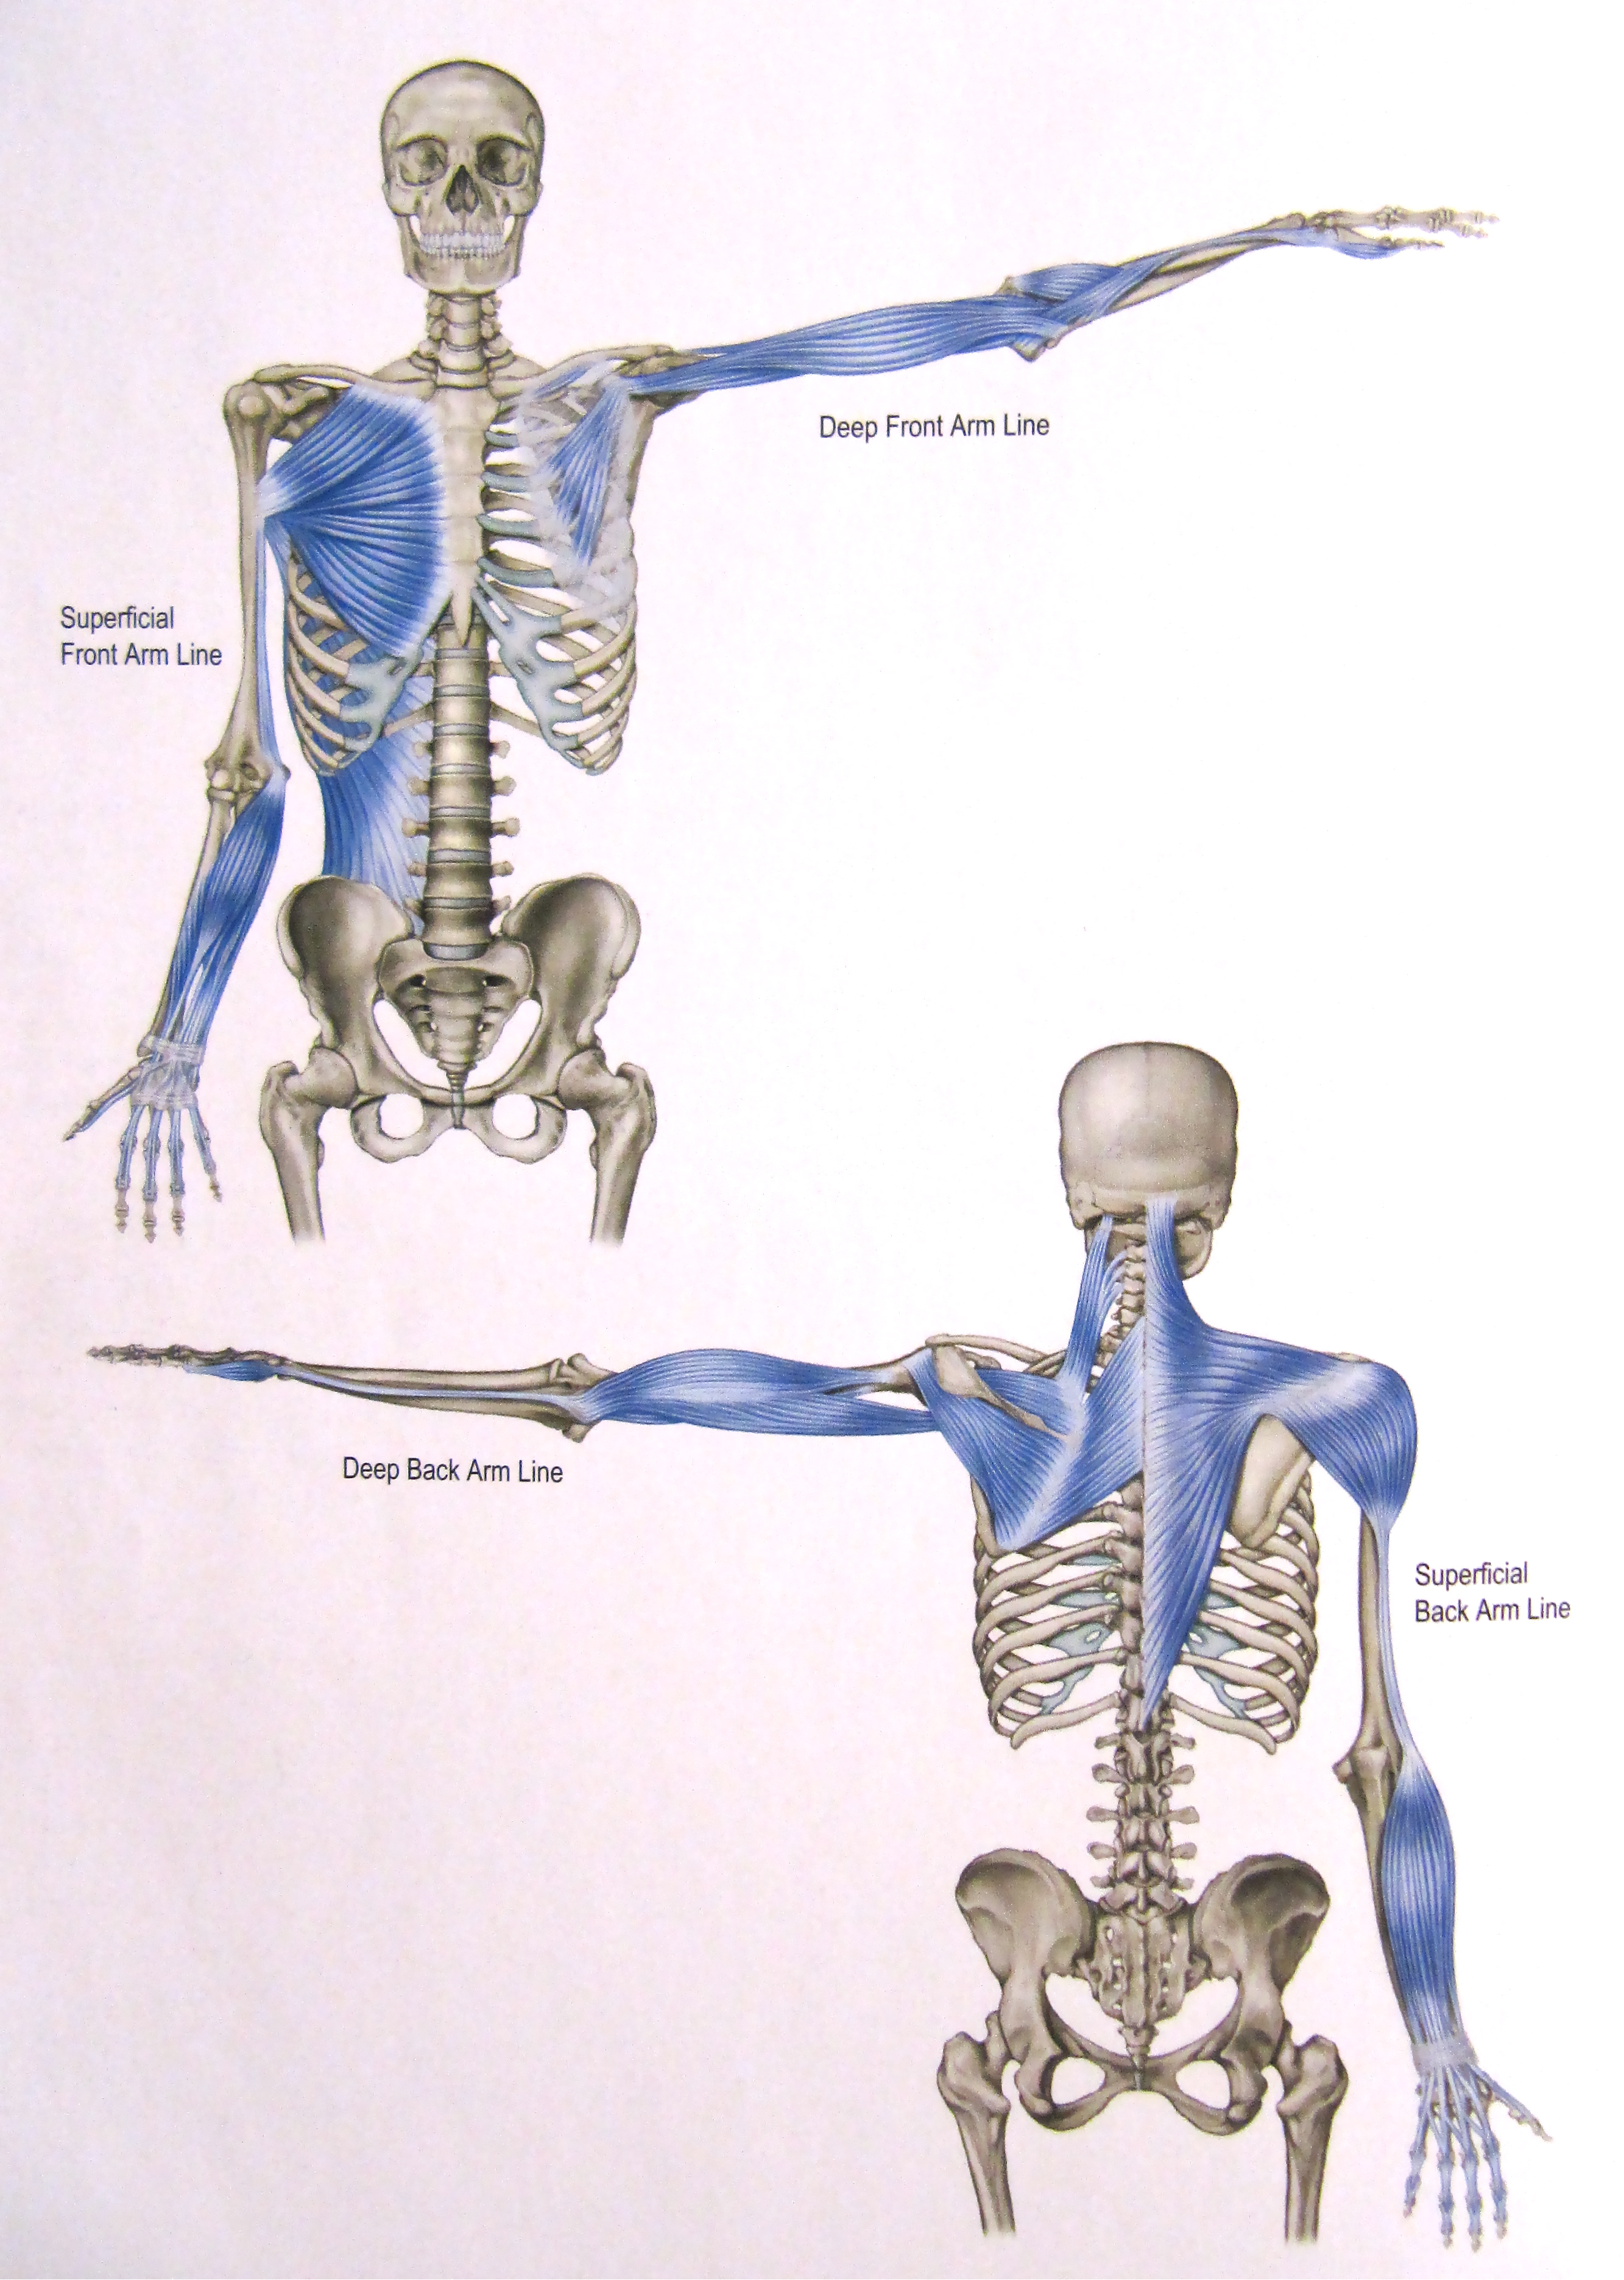 From Anatomy Trains: Myofascial Meridians for Manual and Movement Therapist - Tom Myers, 2nd edition.